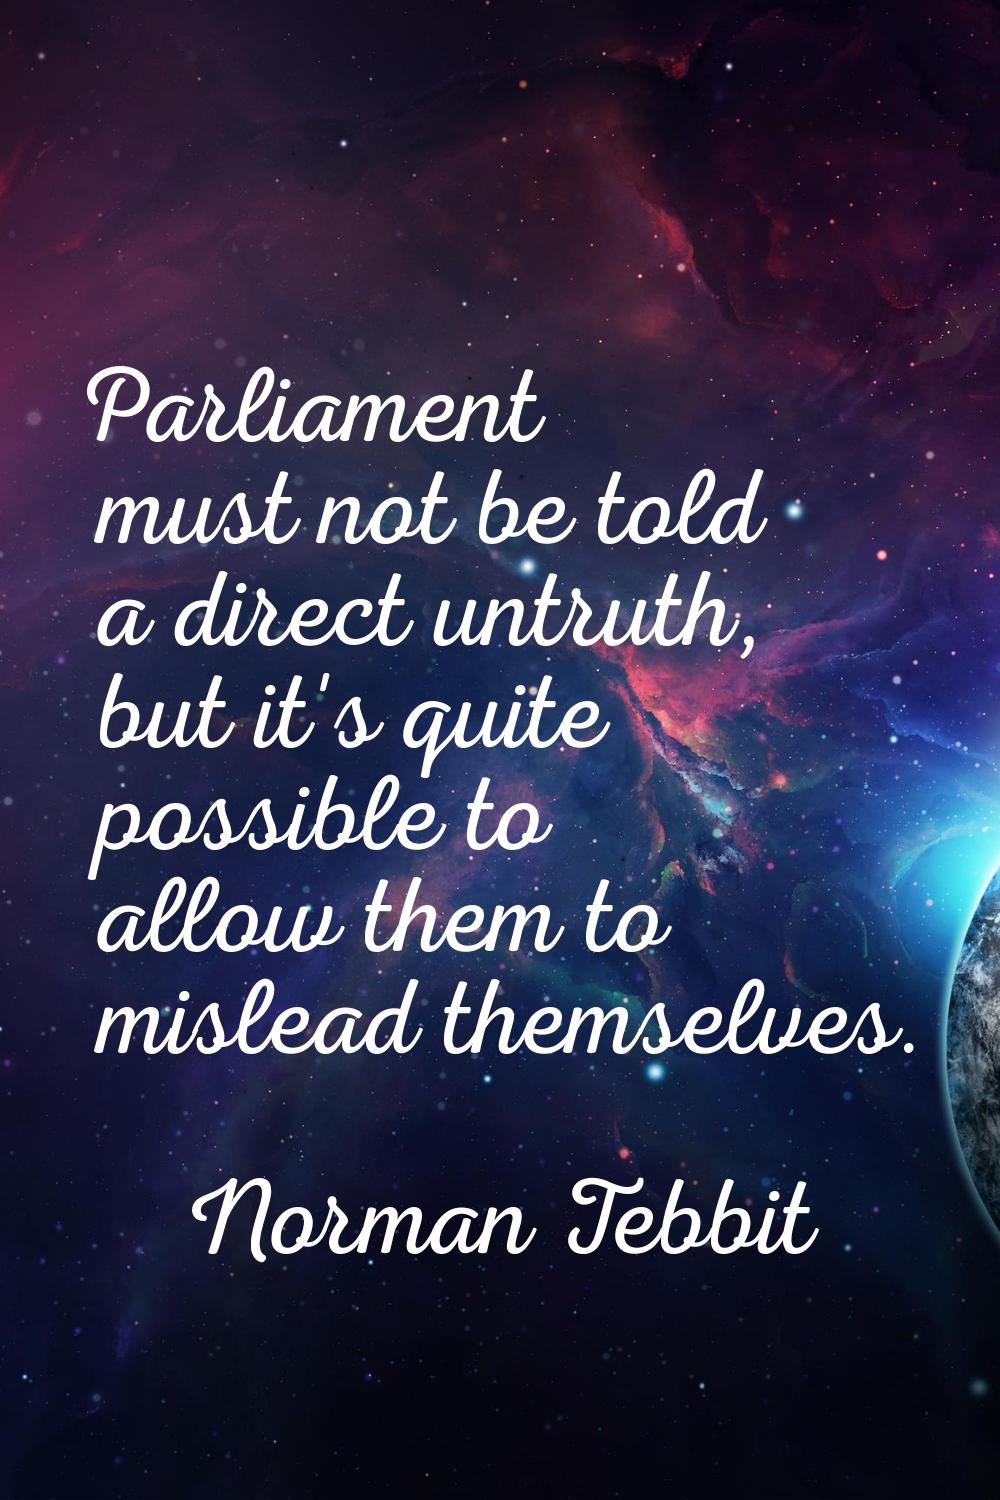 Parliament must not be told a direct untruth, but it's quite possible to allow them to mislead them